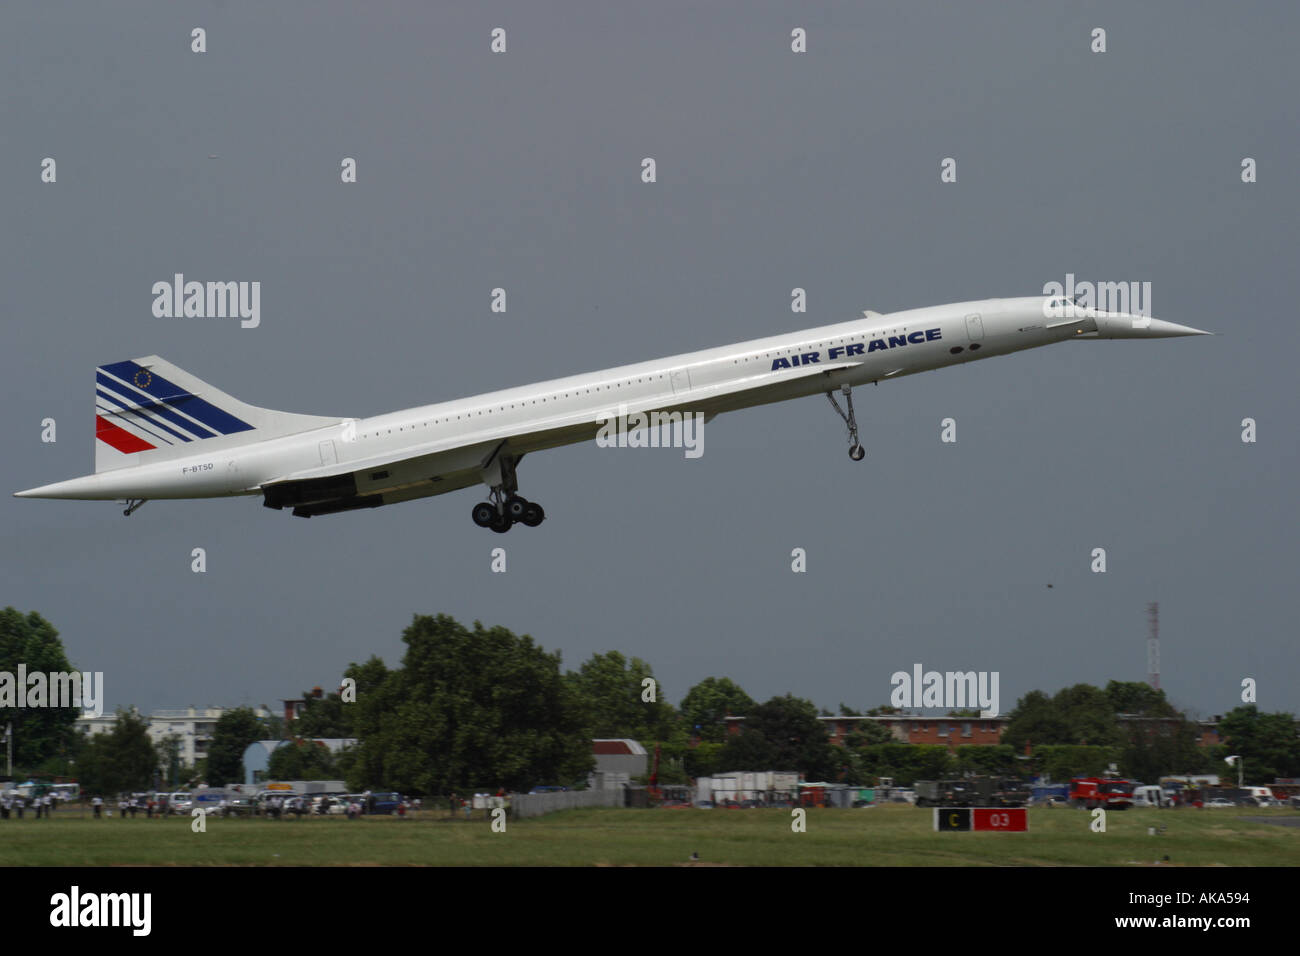 Concorde An Air France Concorde landing at Le Bourget airport Paris in June 2003 Stock Photo